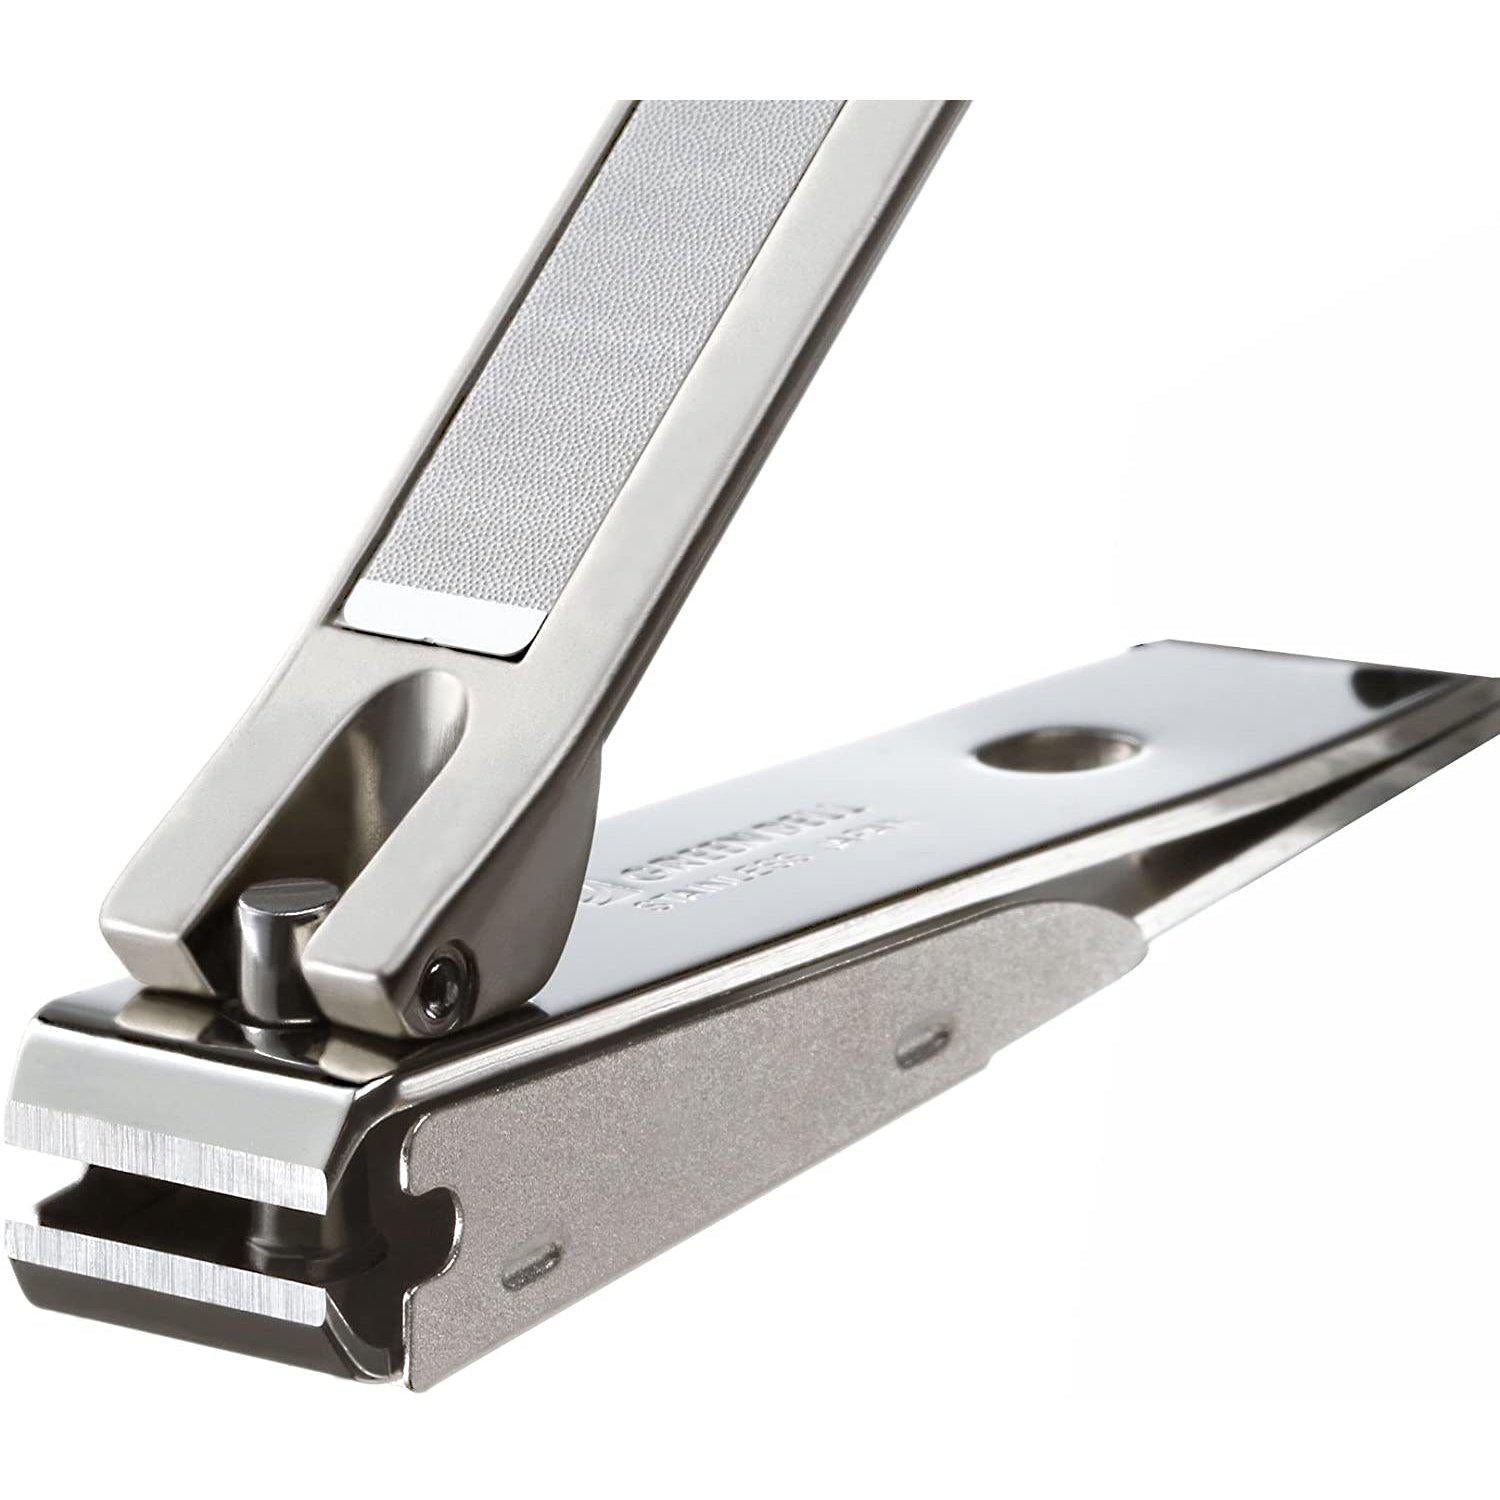 New BELL NAIL CUTTER WITH COVER | Udaan - B2B Buying for Retailers